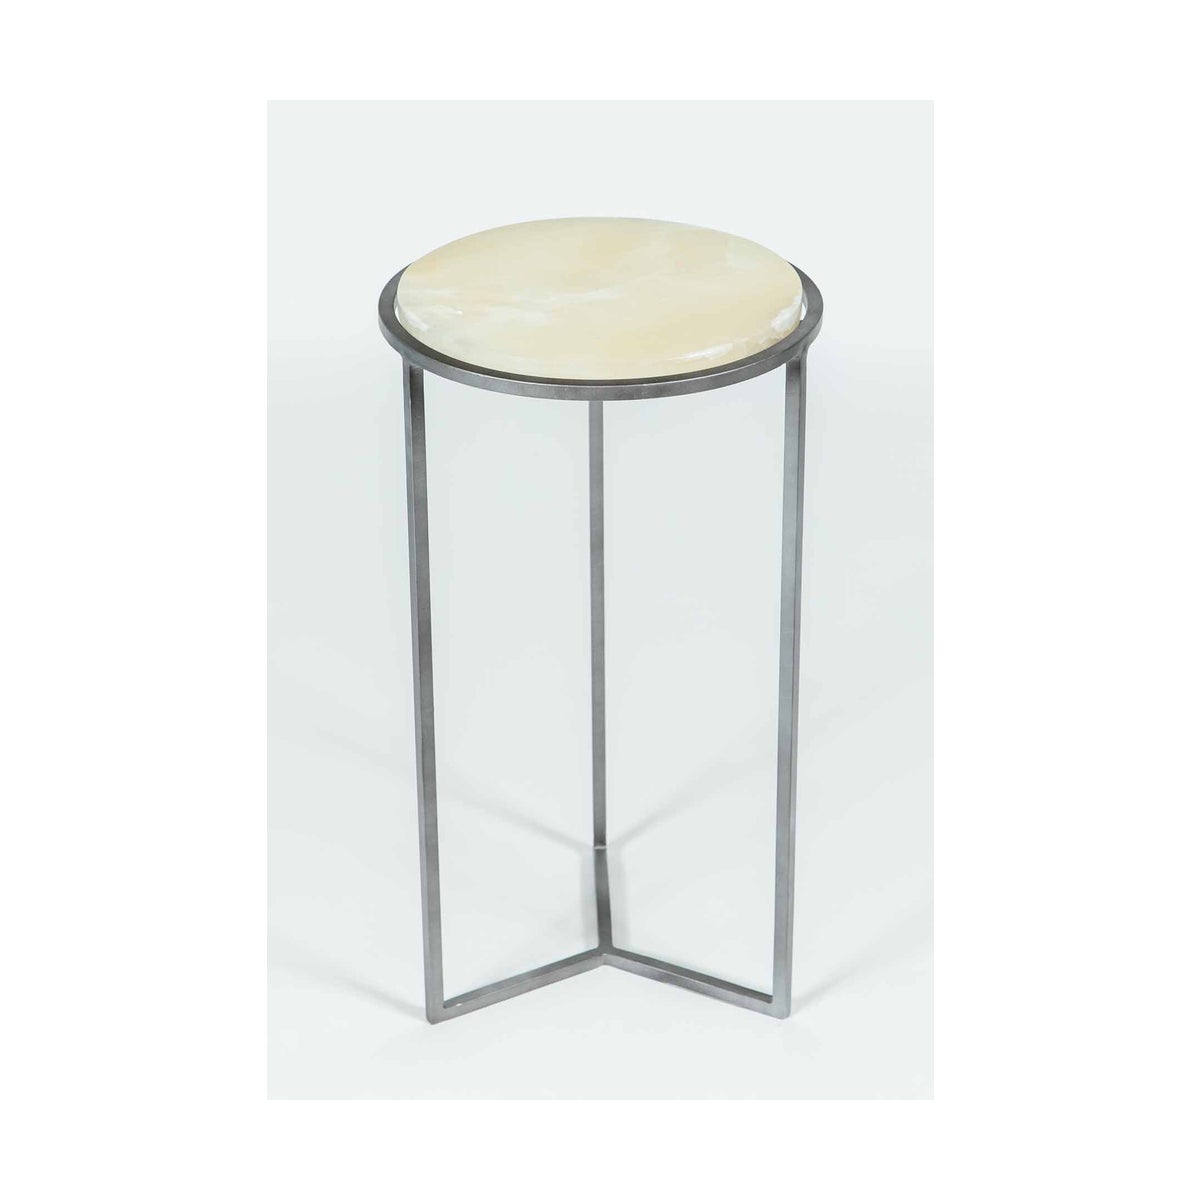 Peyton Accent Table in Antique Silver w/ Cream Onyx Top